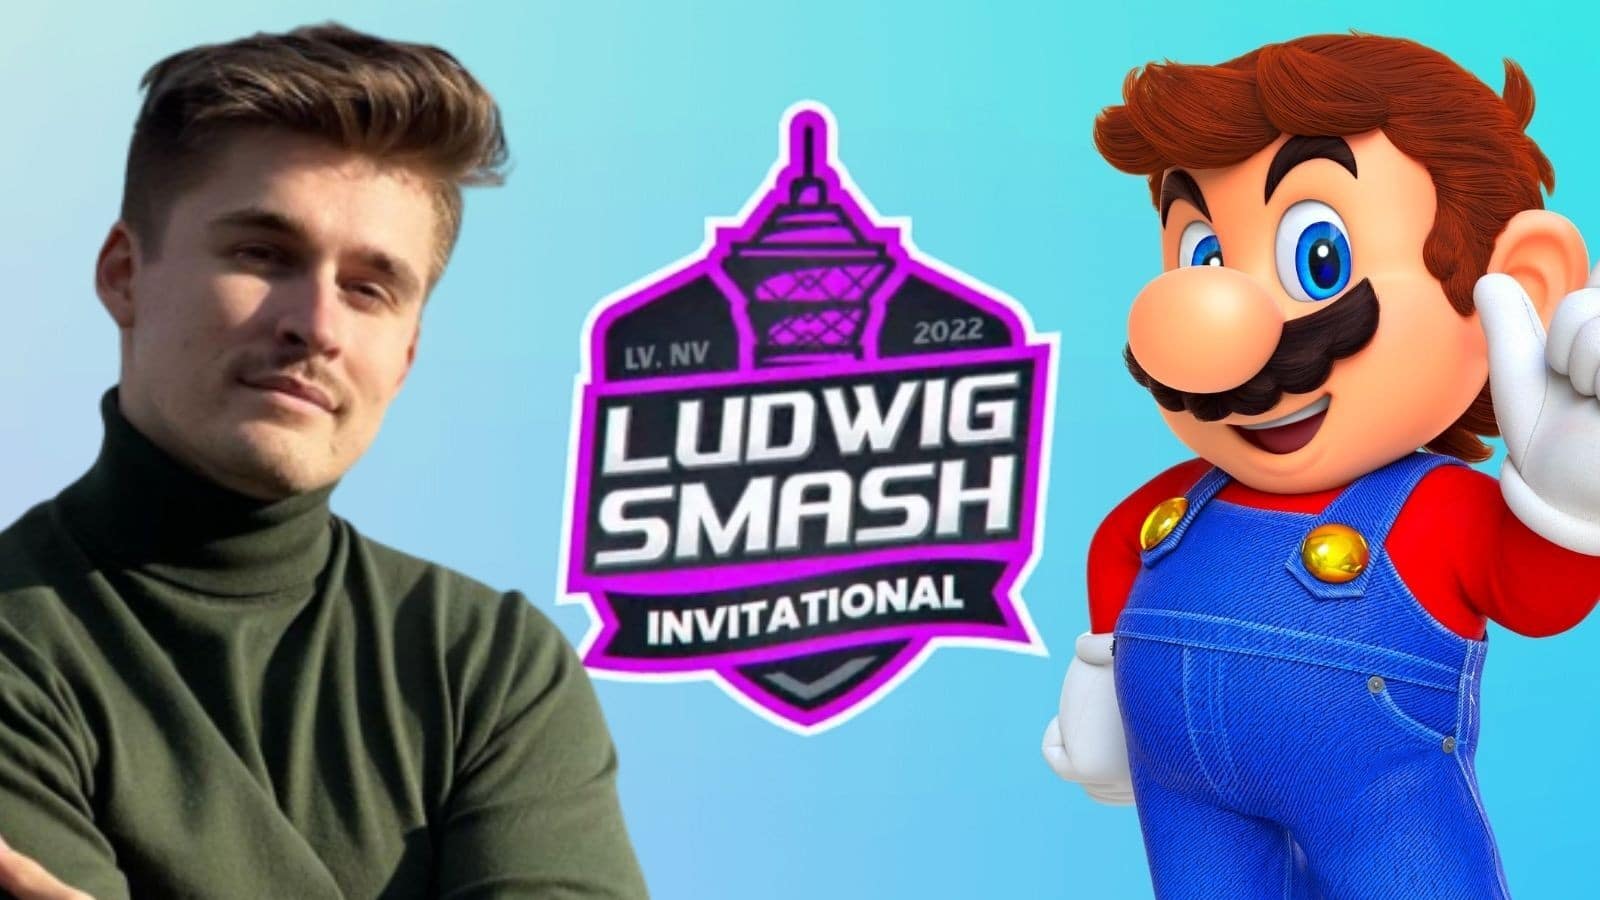 Ludwig has announced the Smash Invitational with a $1 million prize